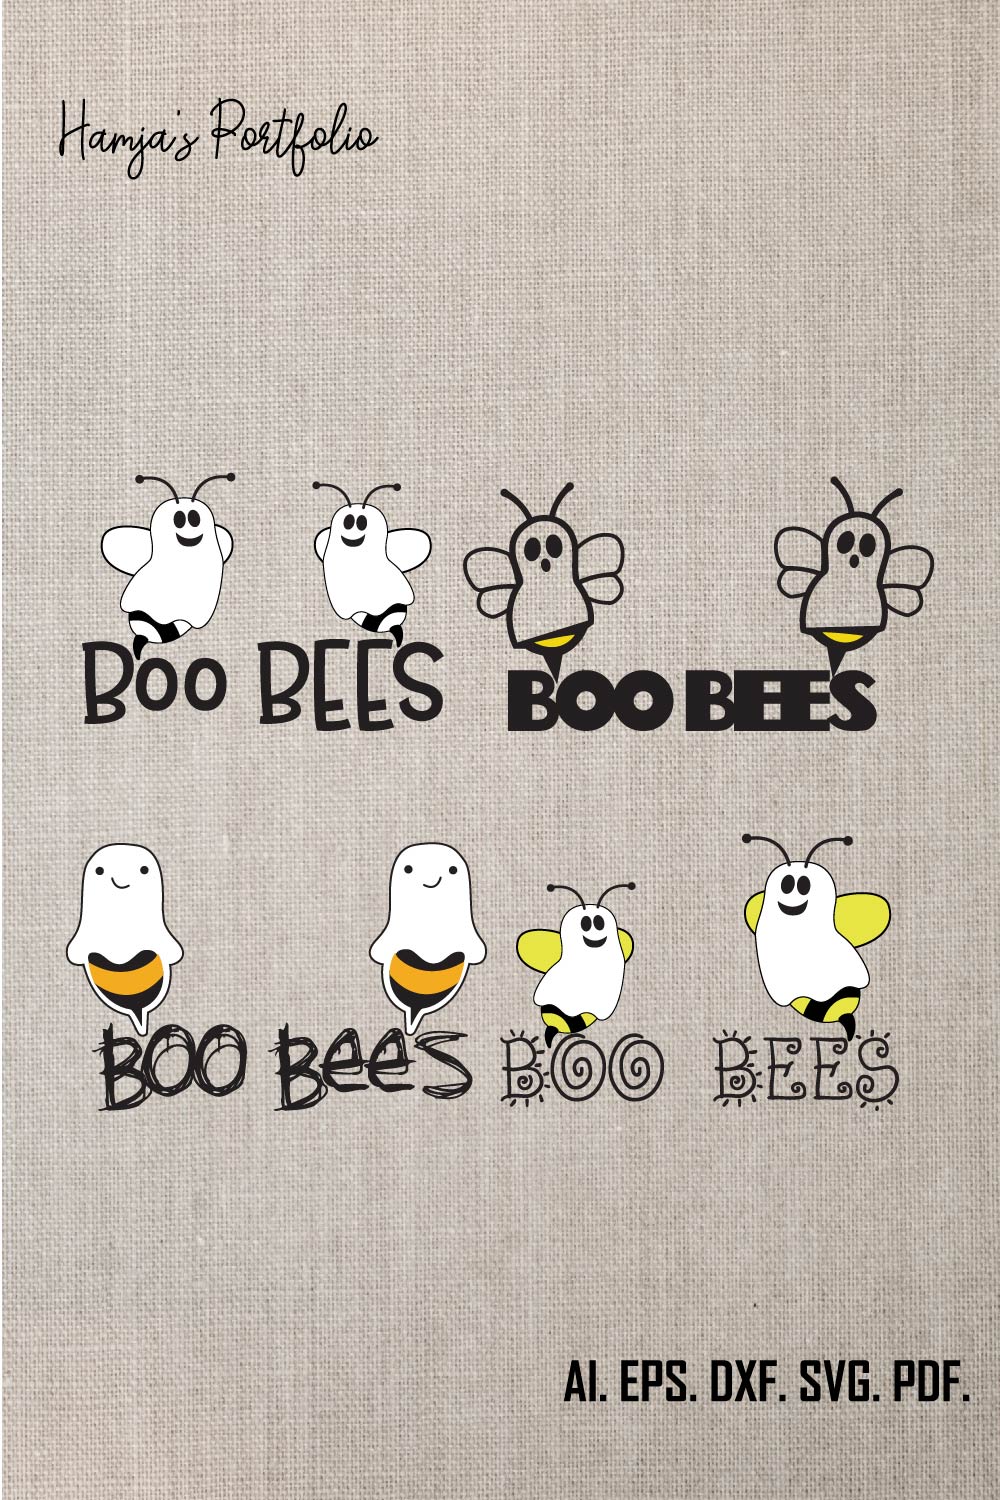 Boo bees svg, Halloween SVG, Boo SVG, Ghost SVG, Boo Bees Svg , Funny Halloween Shirt Svg, Cricut Silhouette cut file,Boo bees svg bundle pinterest preview image.